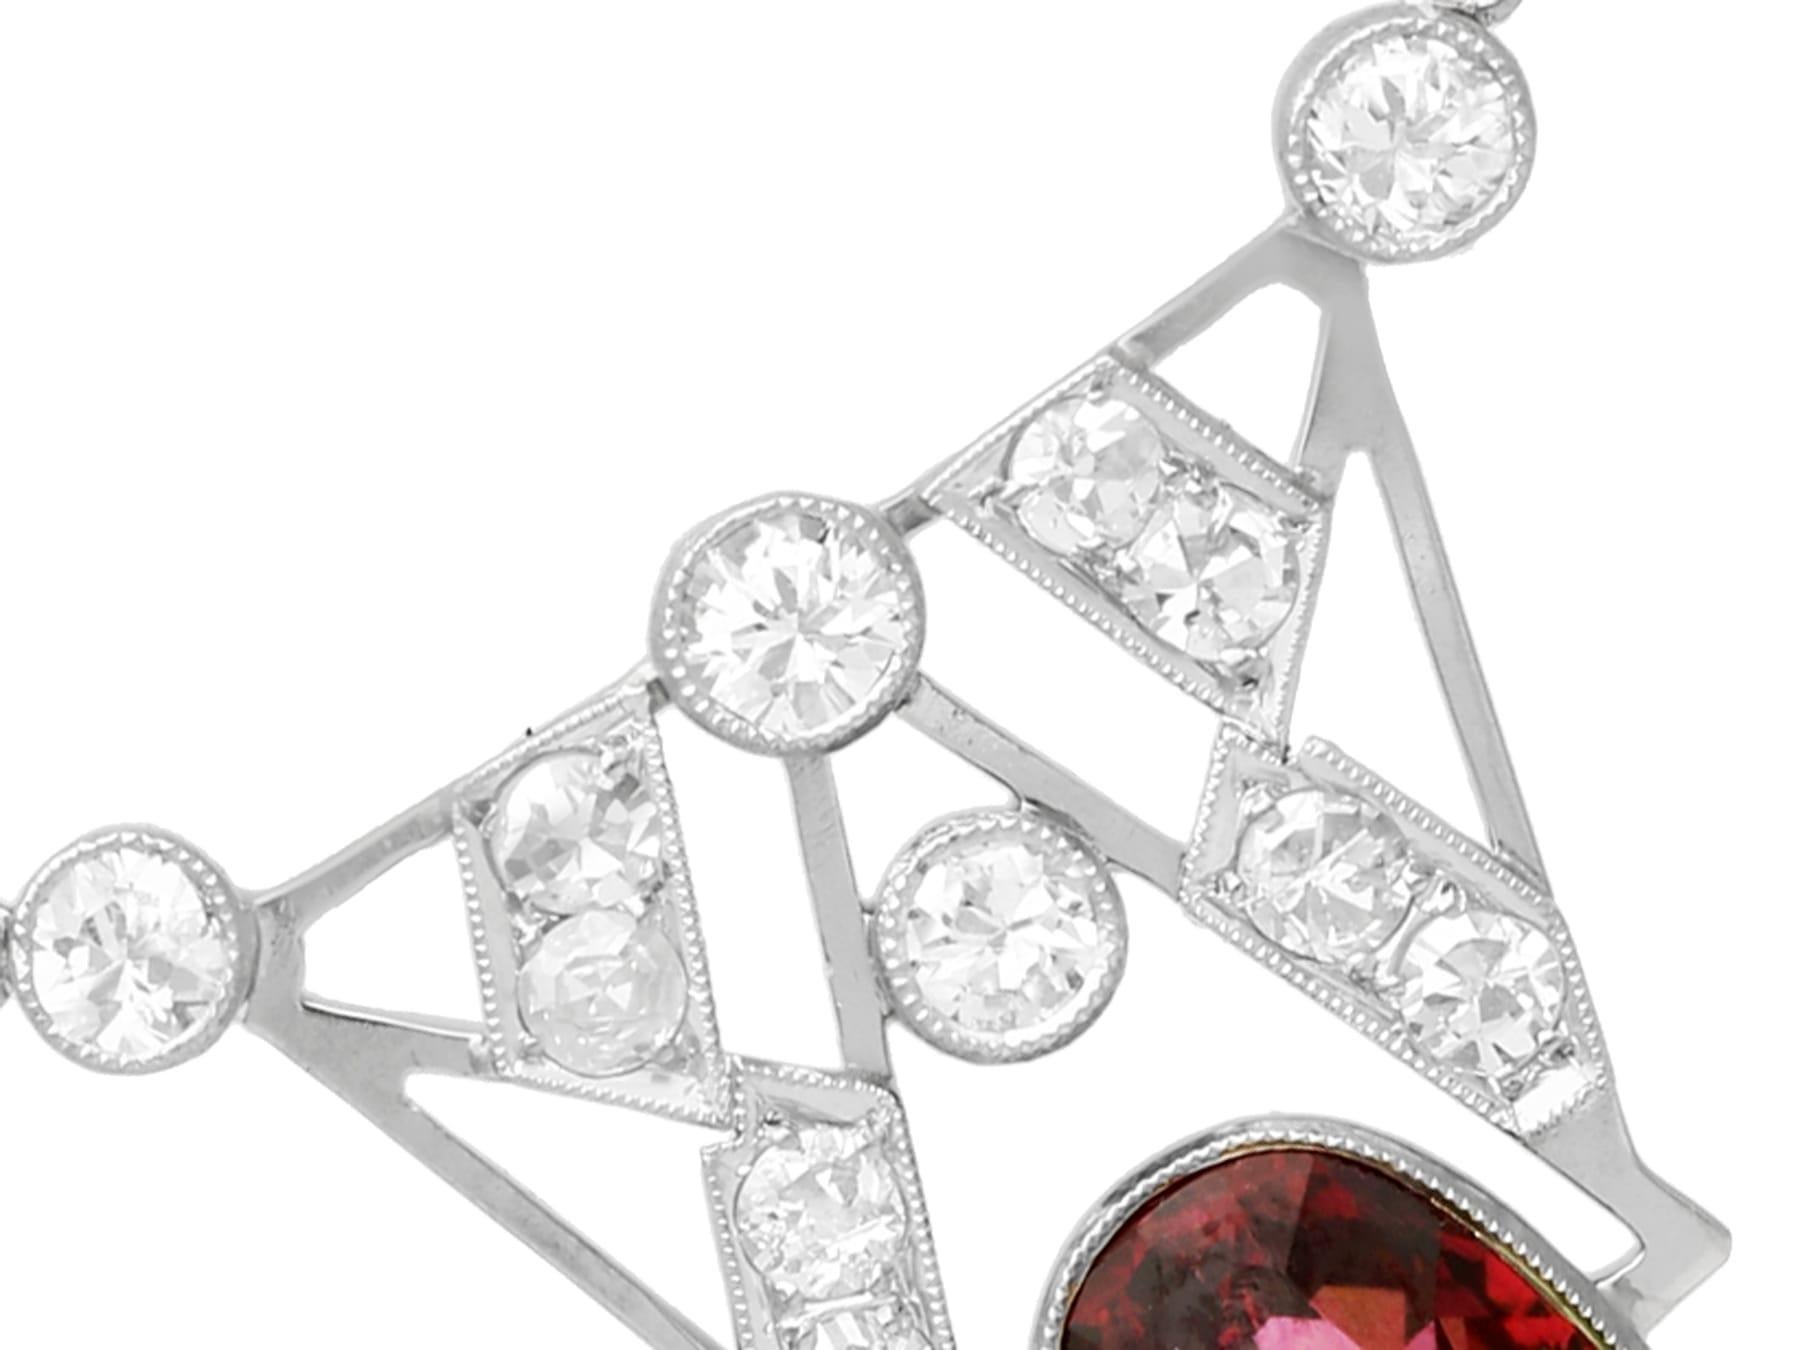 A stunning, fine and impressive antique 4.32 carat garnet and 1.08 carat diamond, 18 karat white gold Art Deco pendant; part of our diverse antique jewelry and estate jewelry collections.

This stunning antique Art Deco necklace has been crafted in